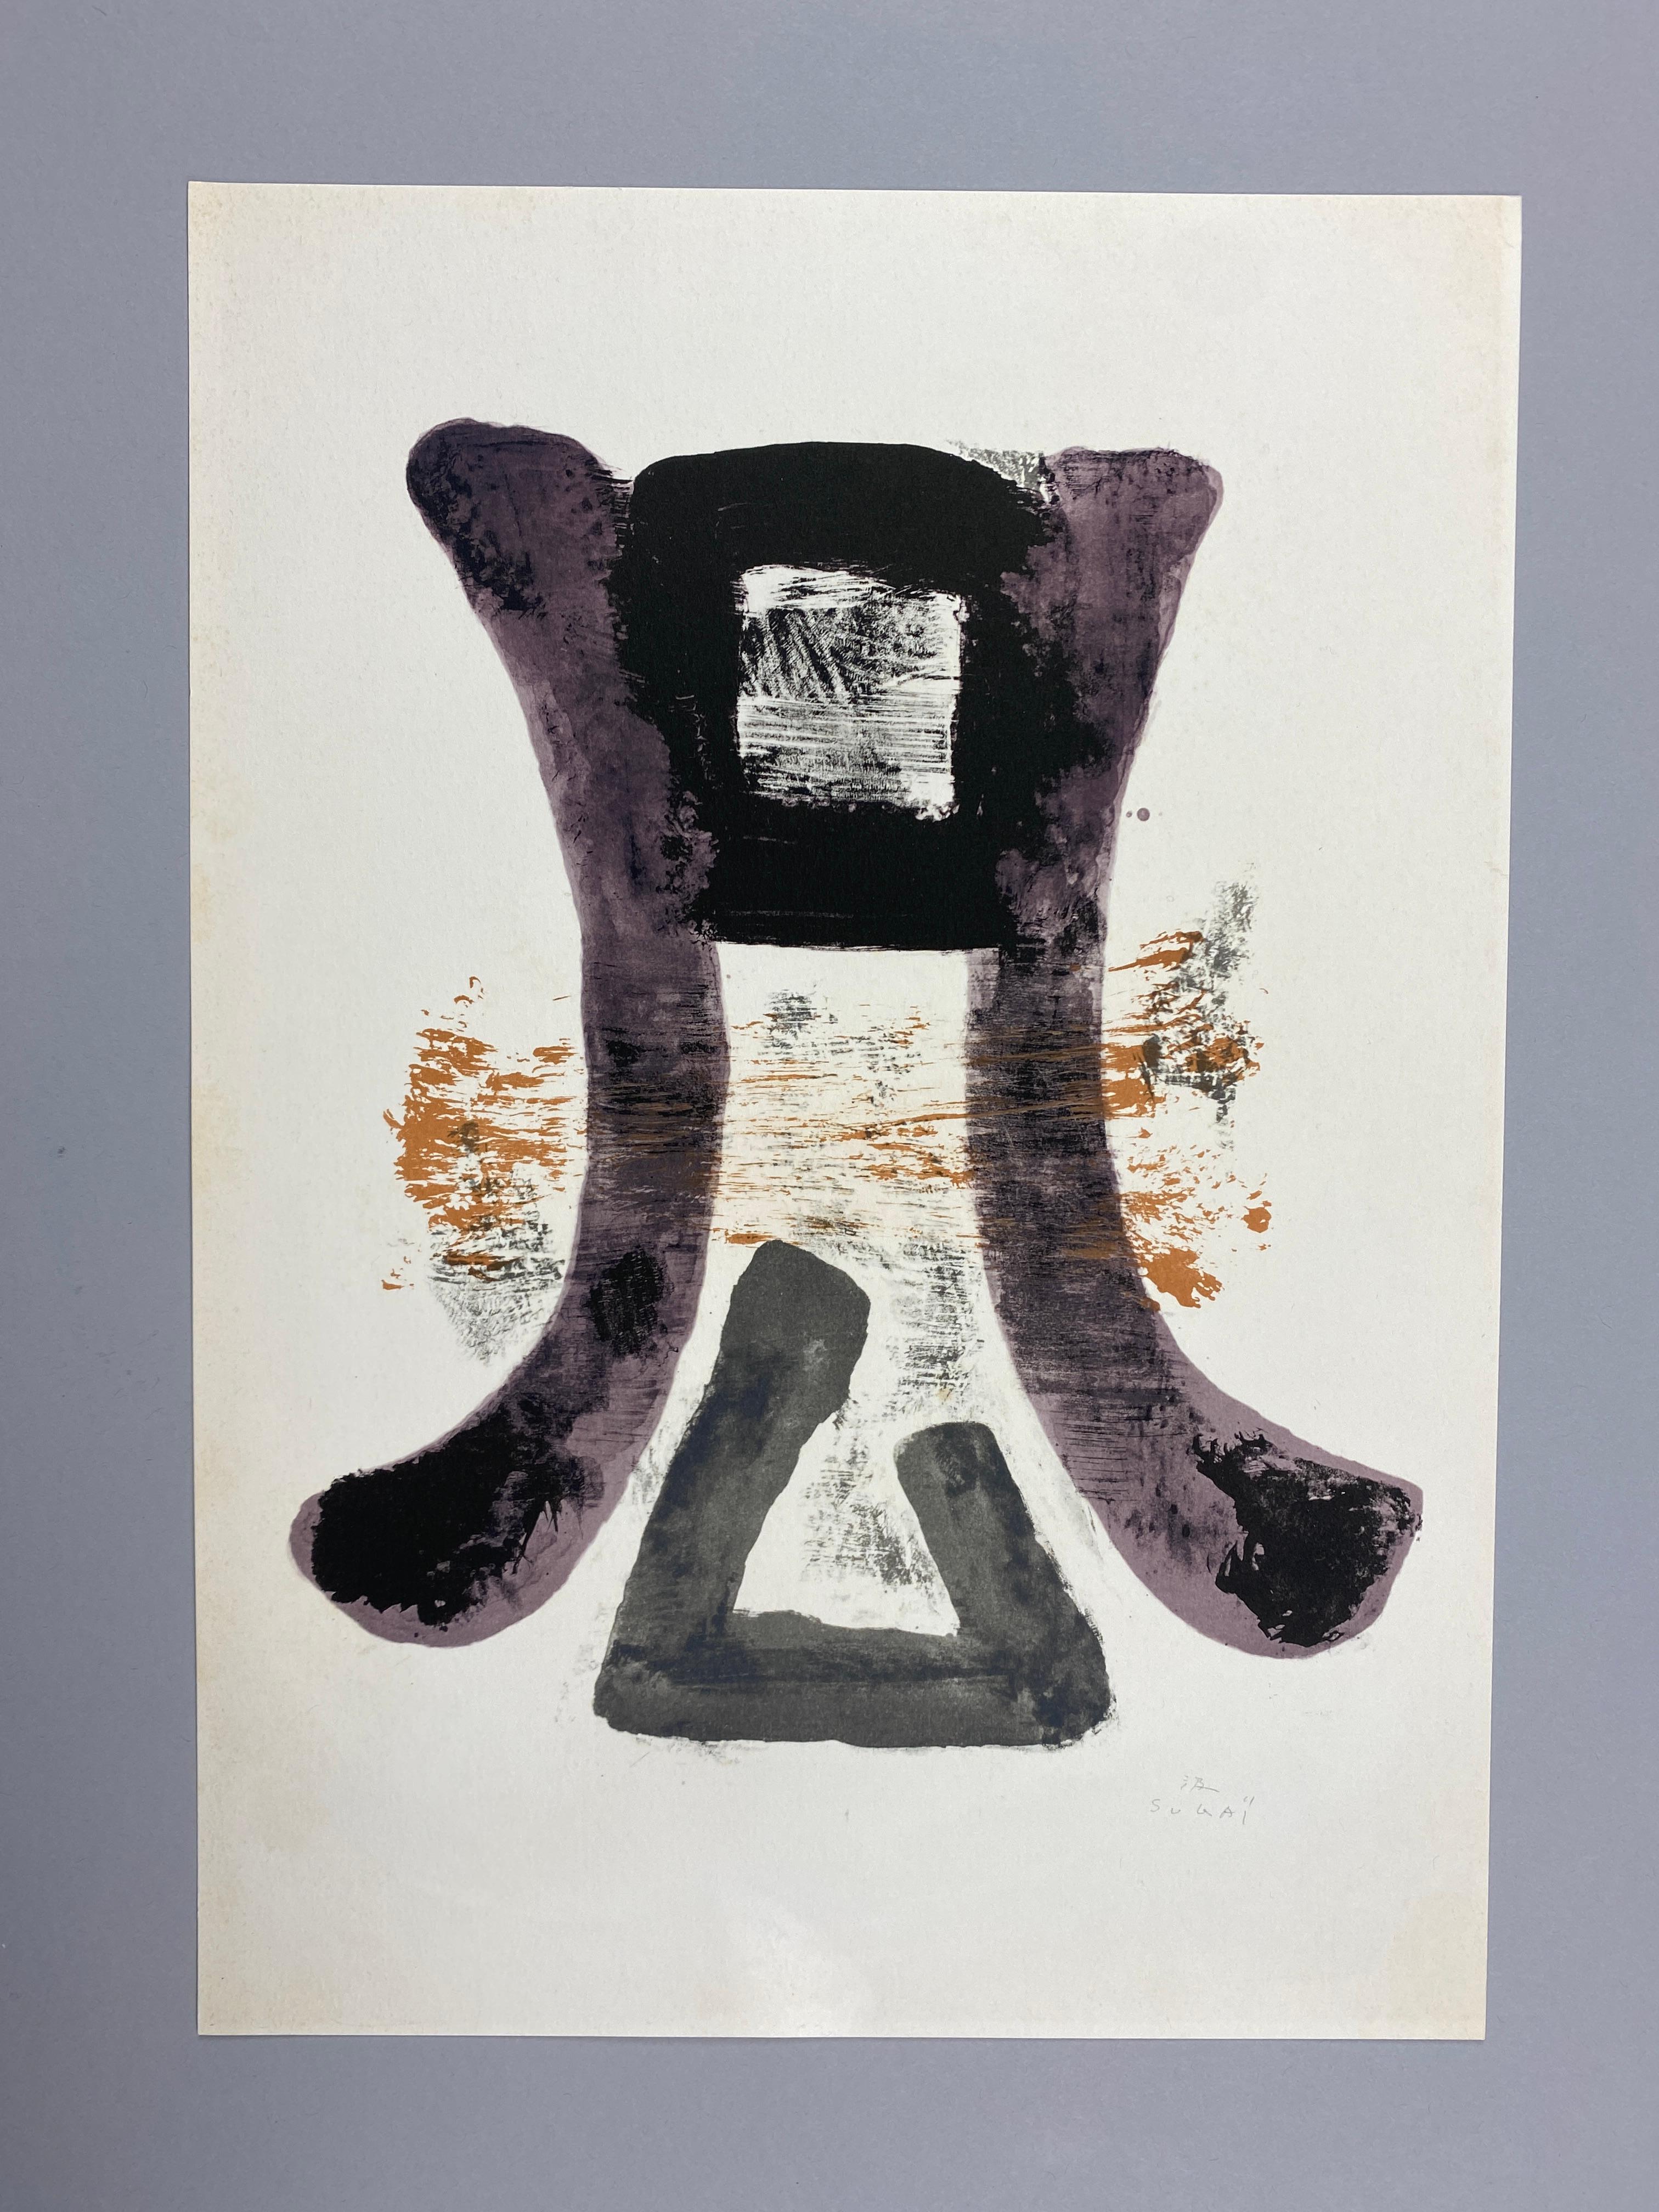 Kumi Sugaï, one of the most internationally acclaimed Japanese painters of the twentieth century.

' Violet ' 1970 Lithograph by Kumi Sugaï in excellent condition. The lithograph is after the 1959 original painting. The work is signed by the artist